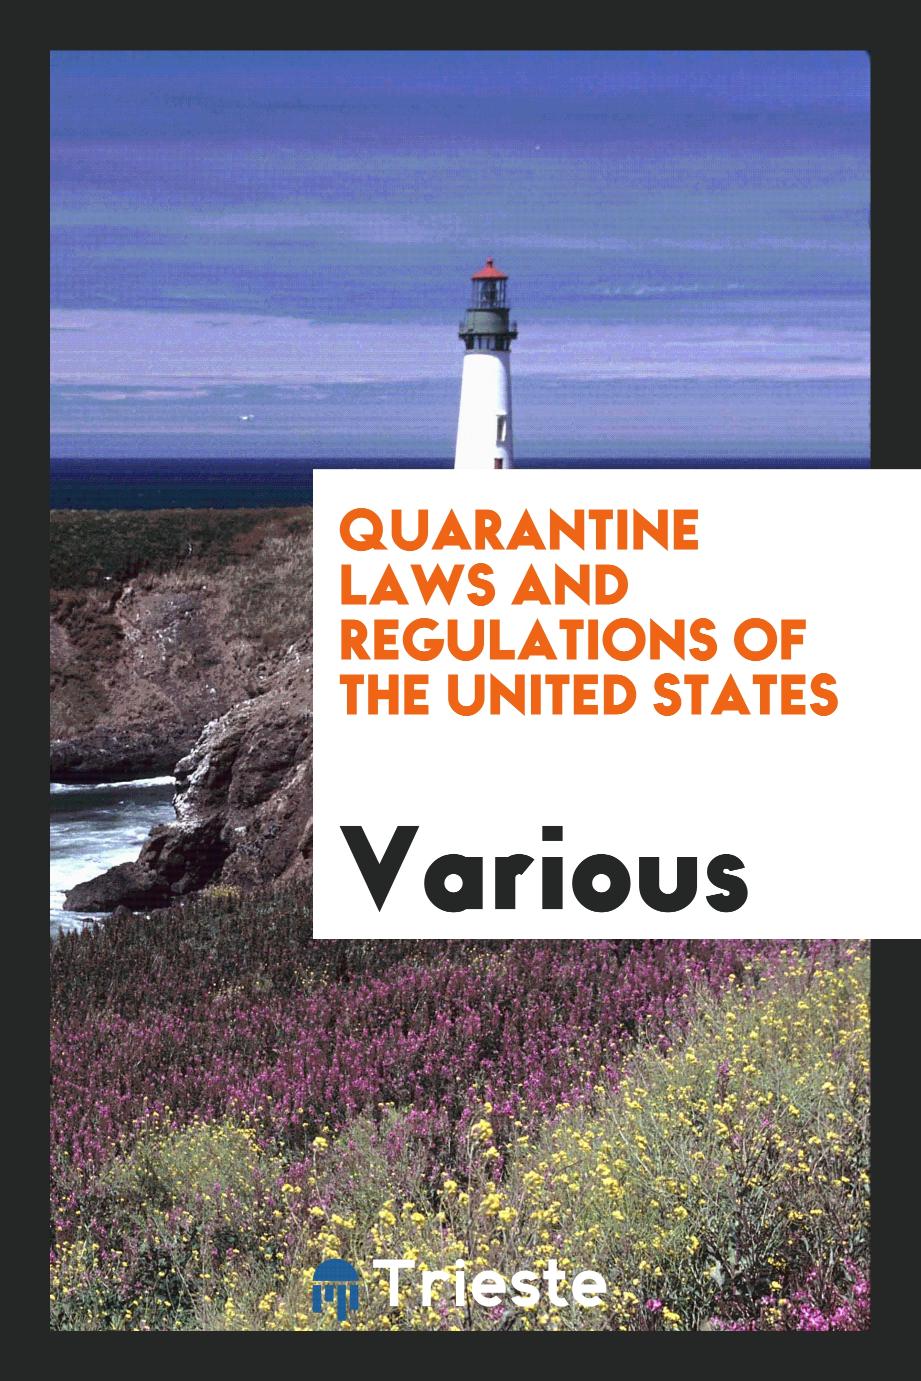 Quarantine laws and regulations of the United States